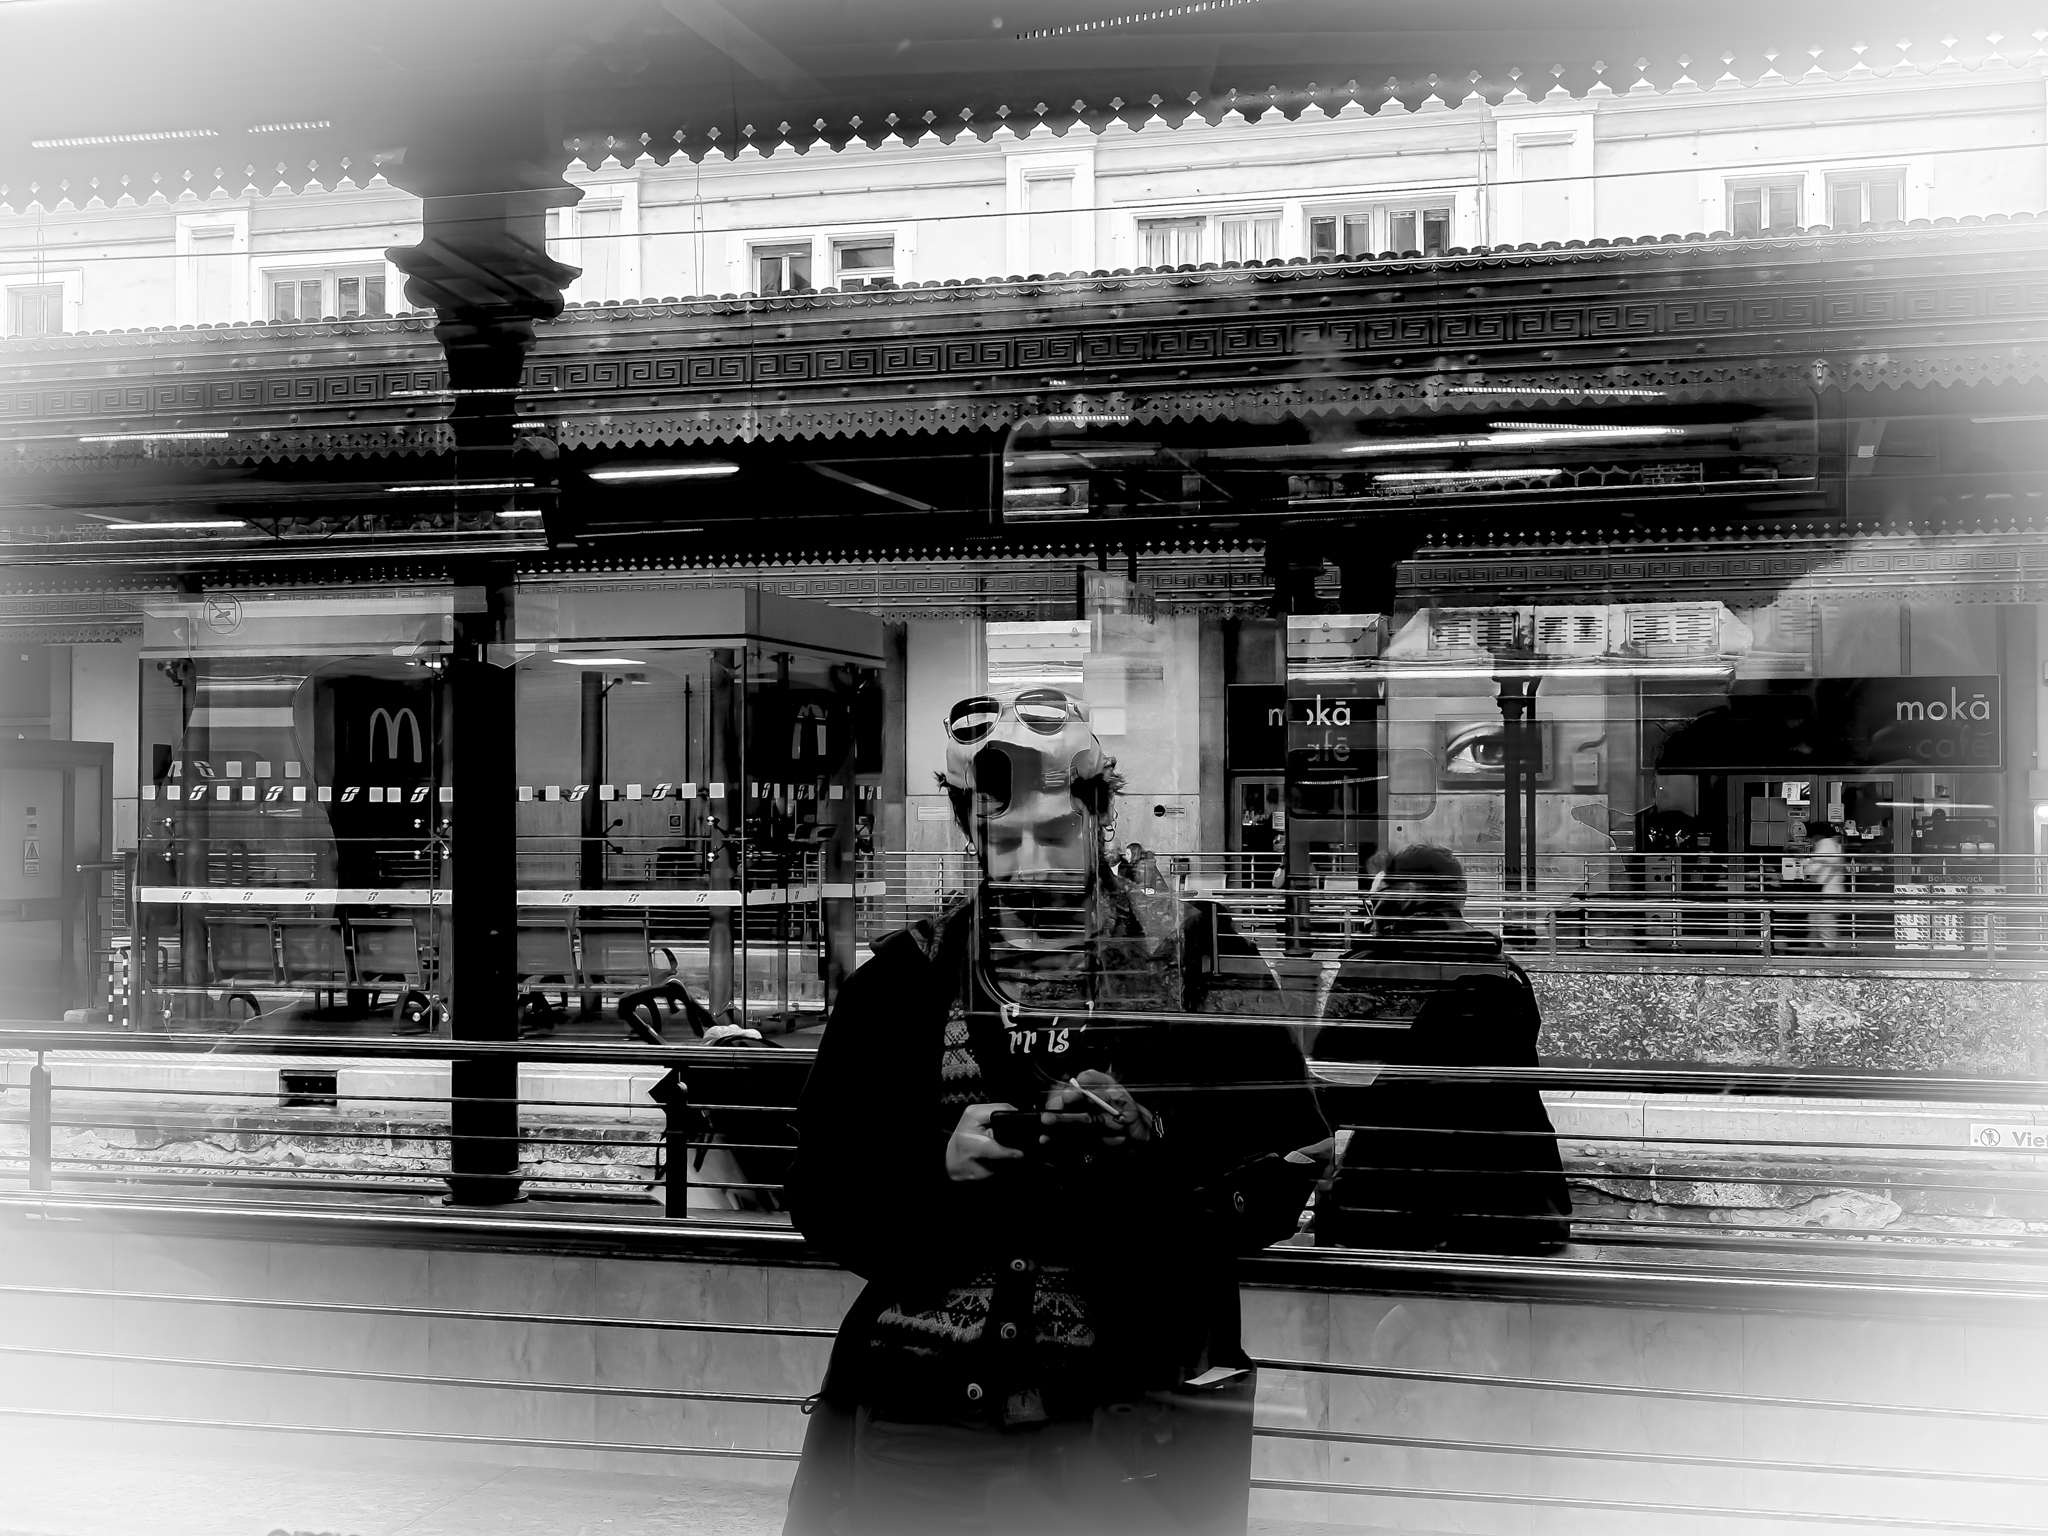 Station Reflections...